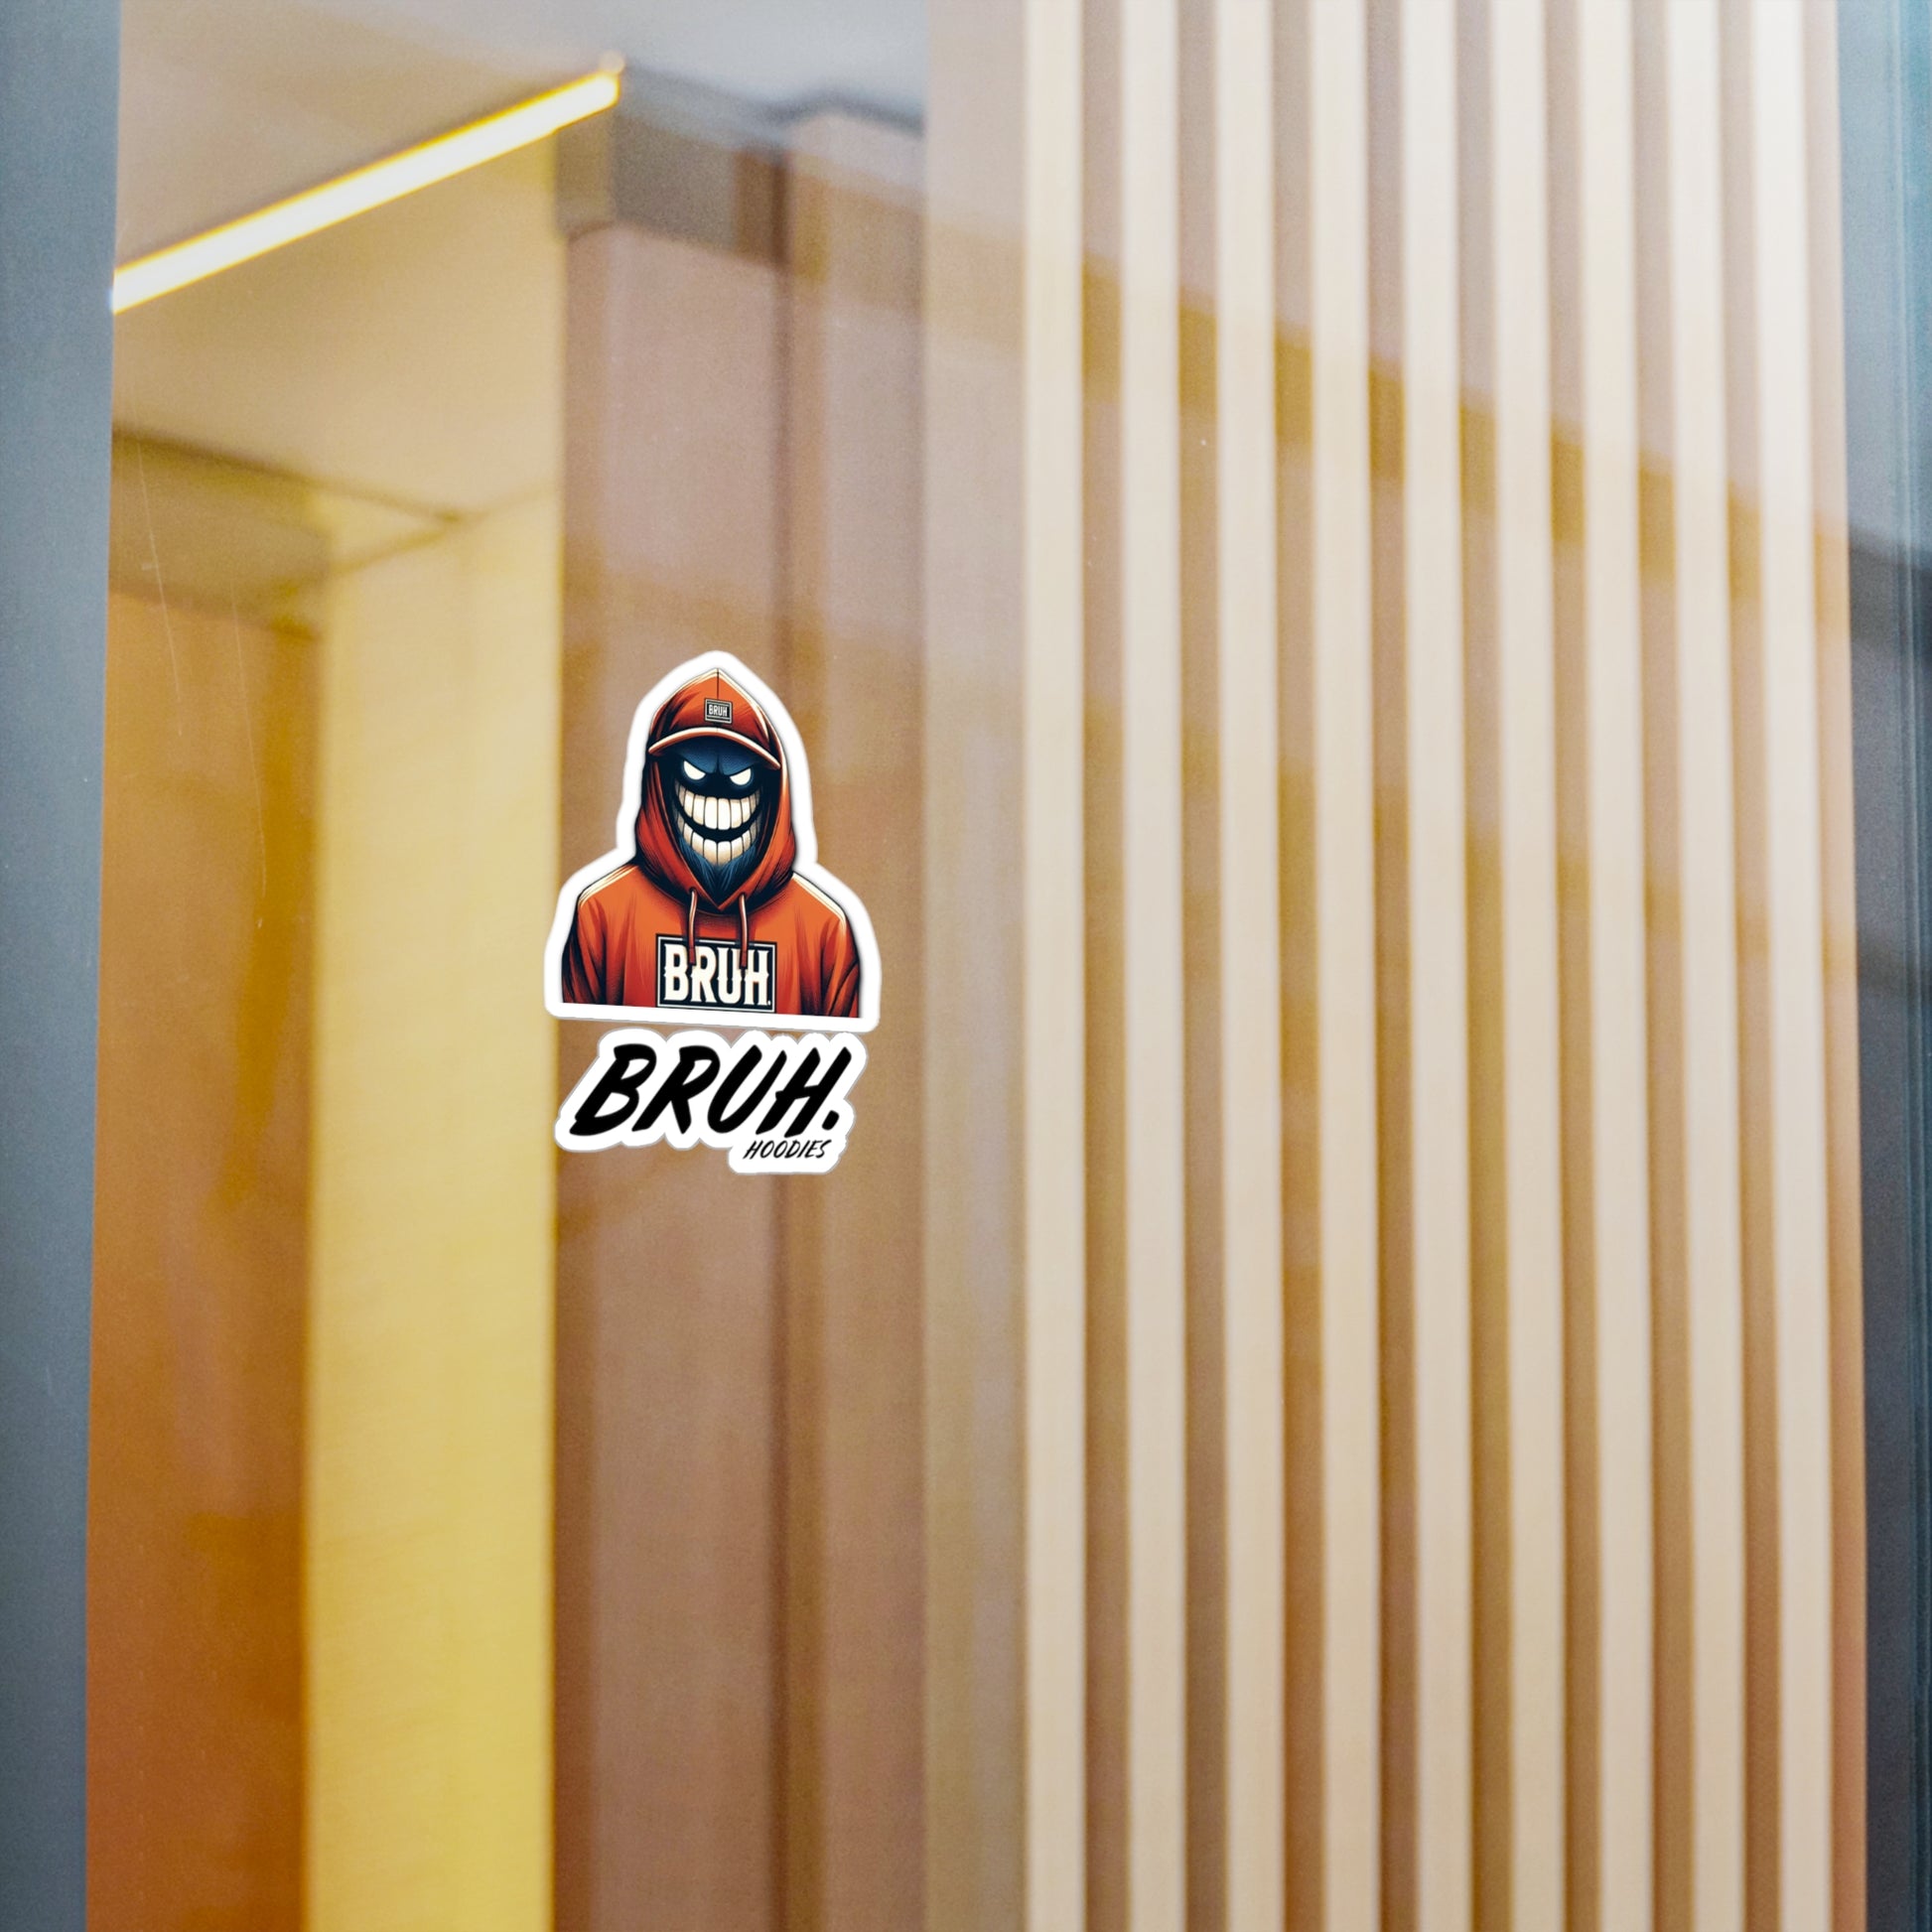 Unleash Your Style: Bruh. Hoodies Sticker - Wearable Art and Comfort Combined!